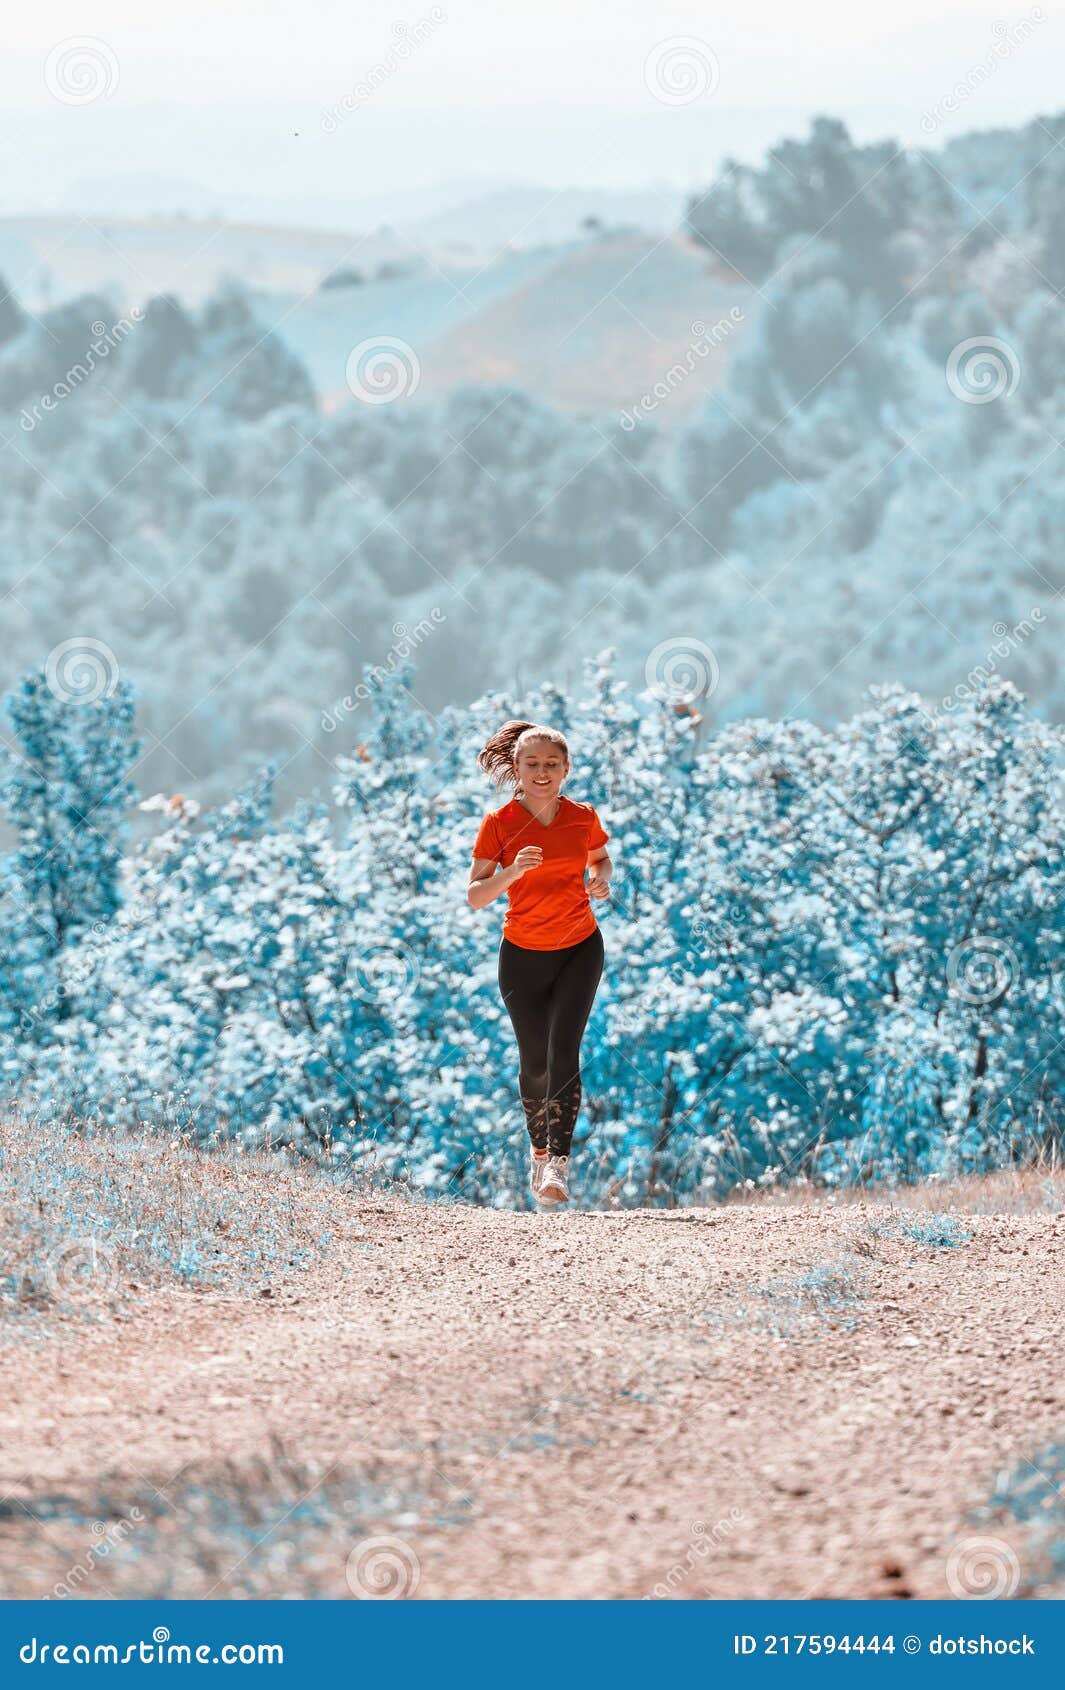 woman jogging on a country road through the beautiful sunny forest